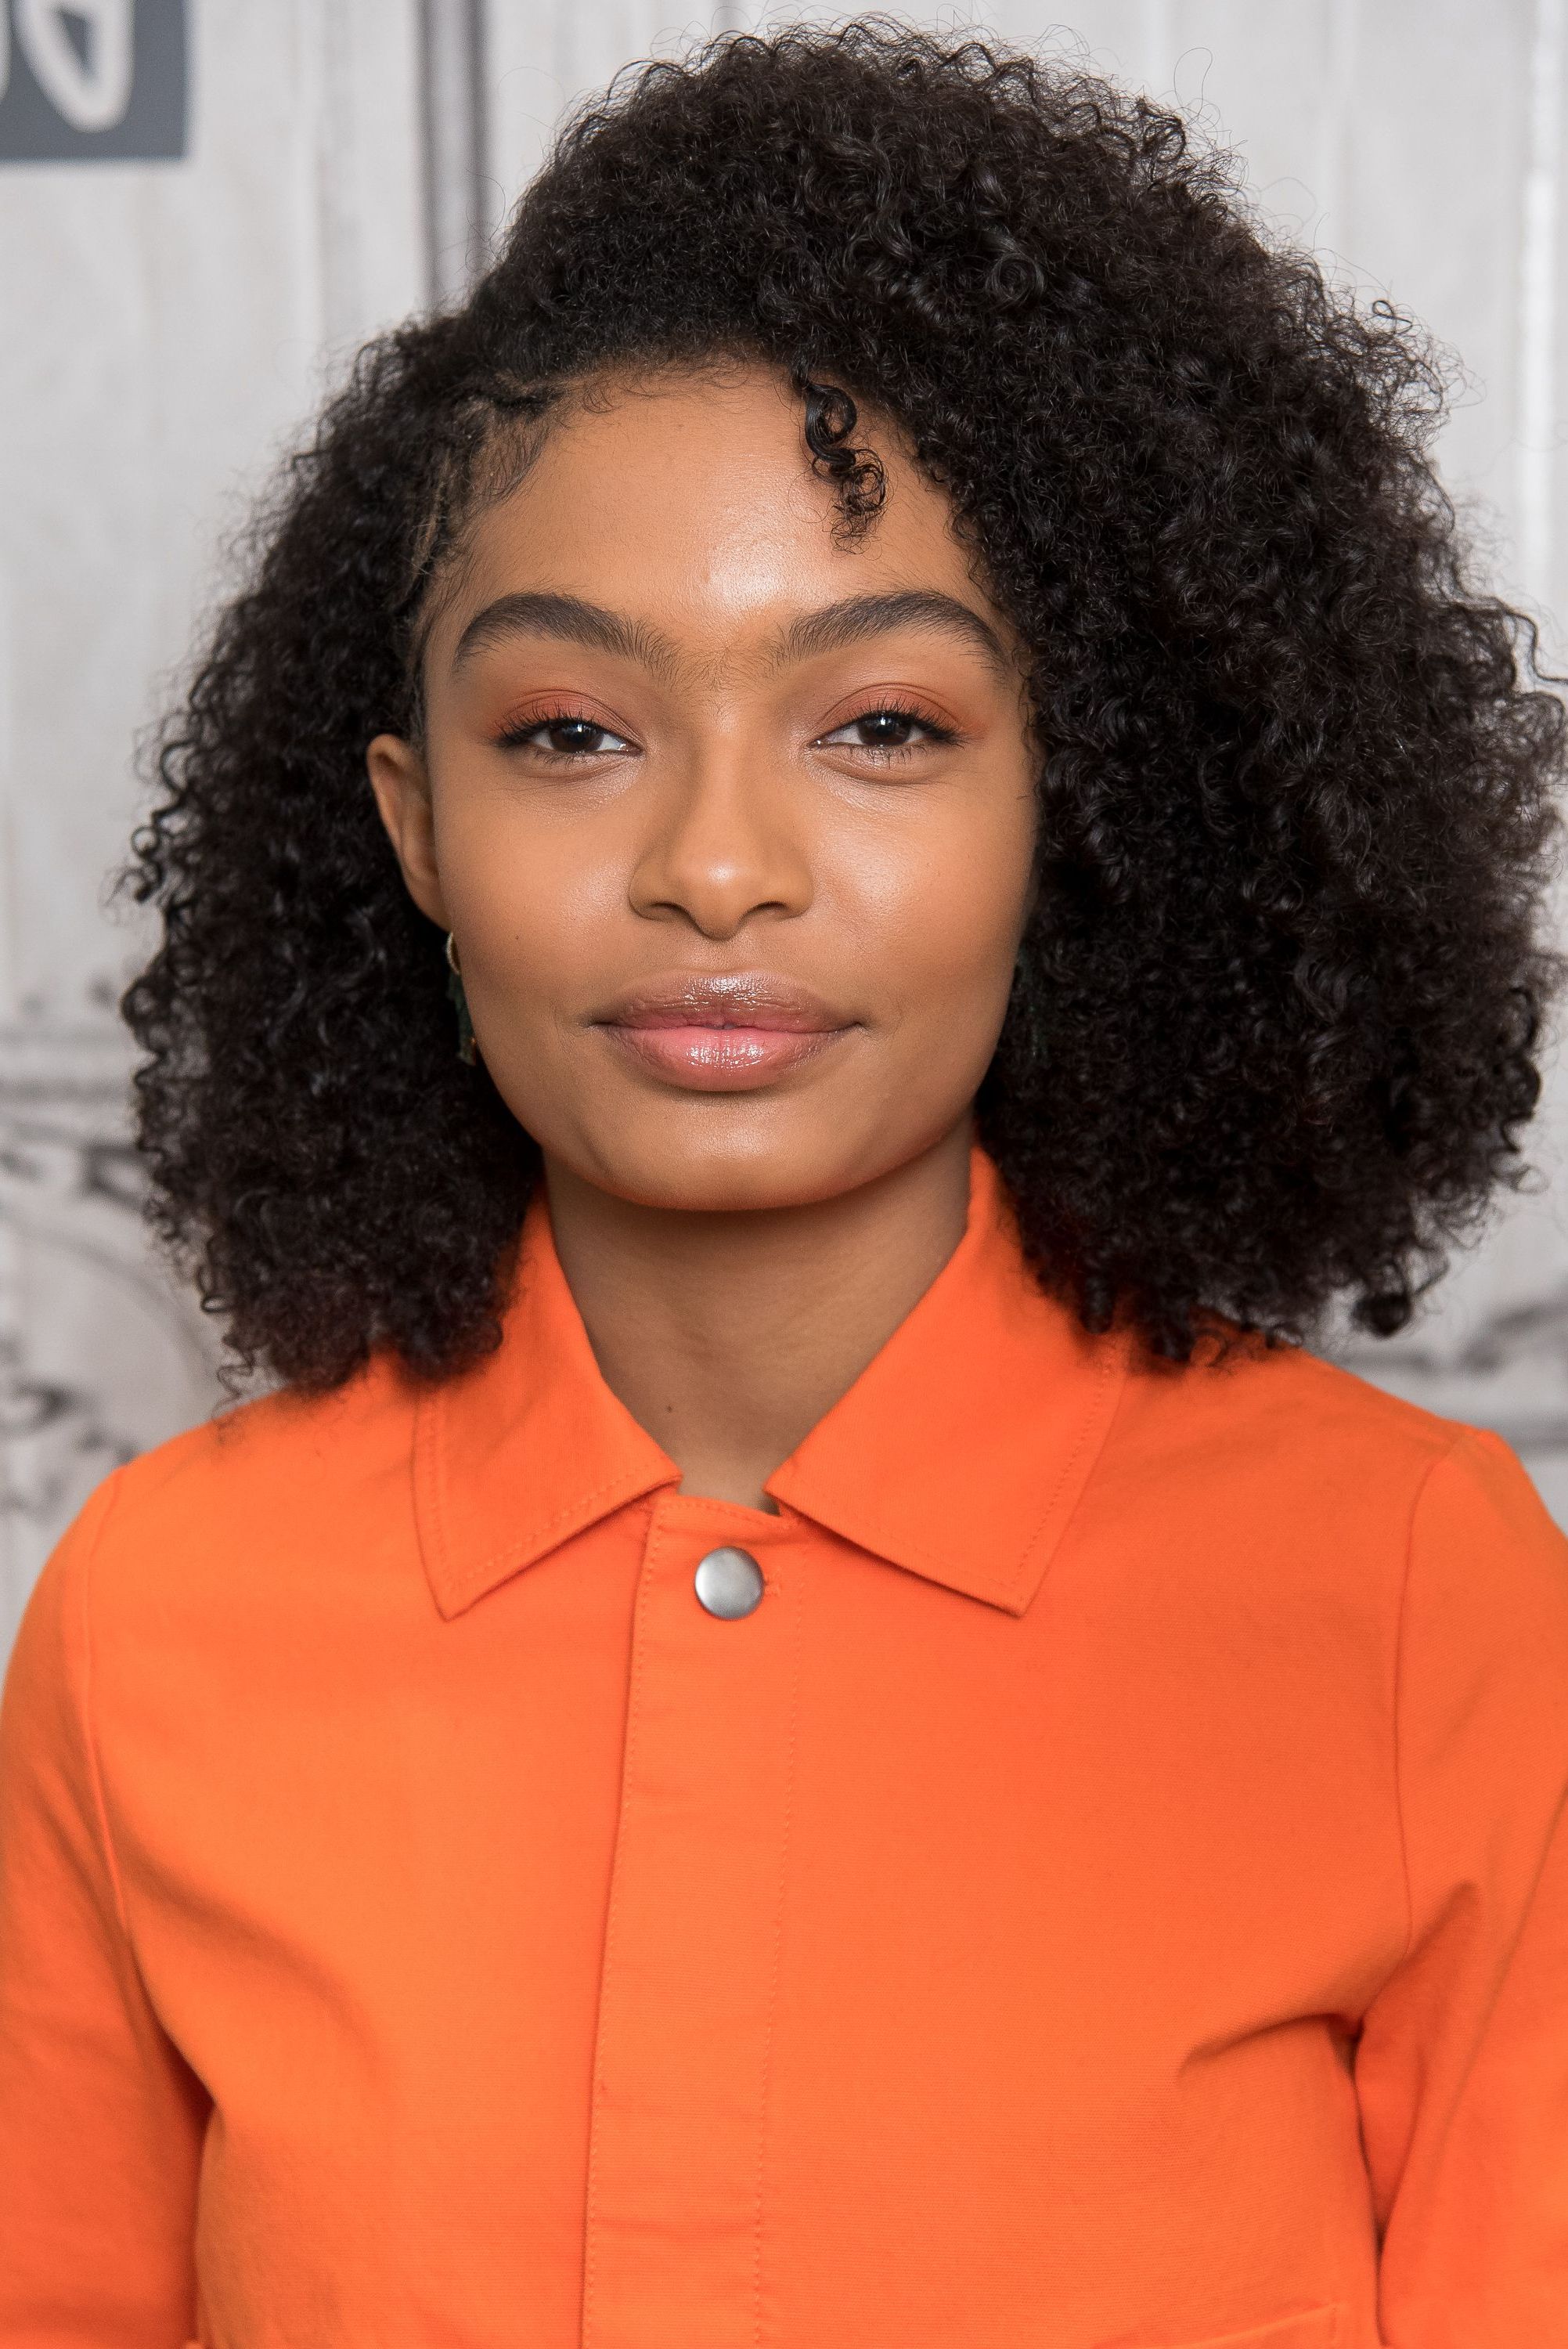 40 Best Medium Hairstyles – Celebrities With Shoulder Length Haircuts In Most Recently Released Curly Black Medium Hairstyles (View 16 of 20)